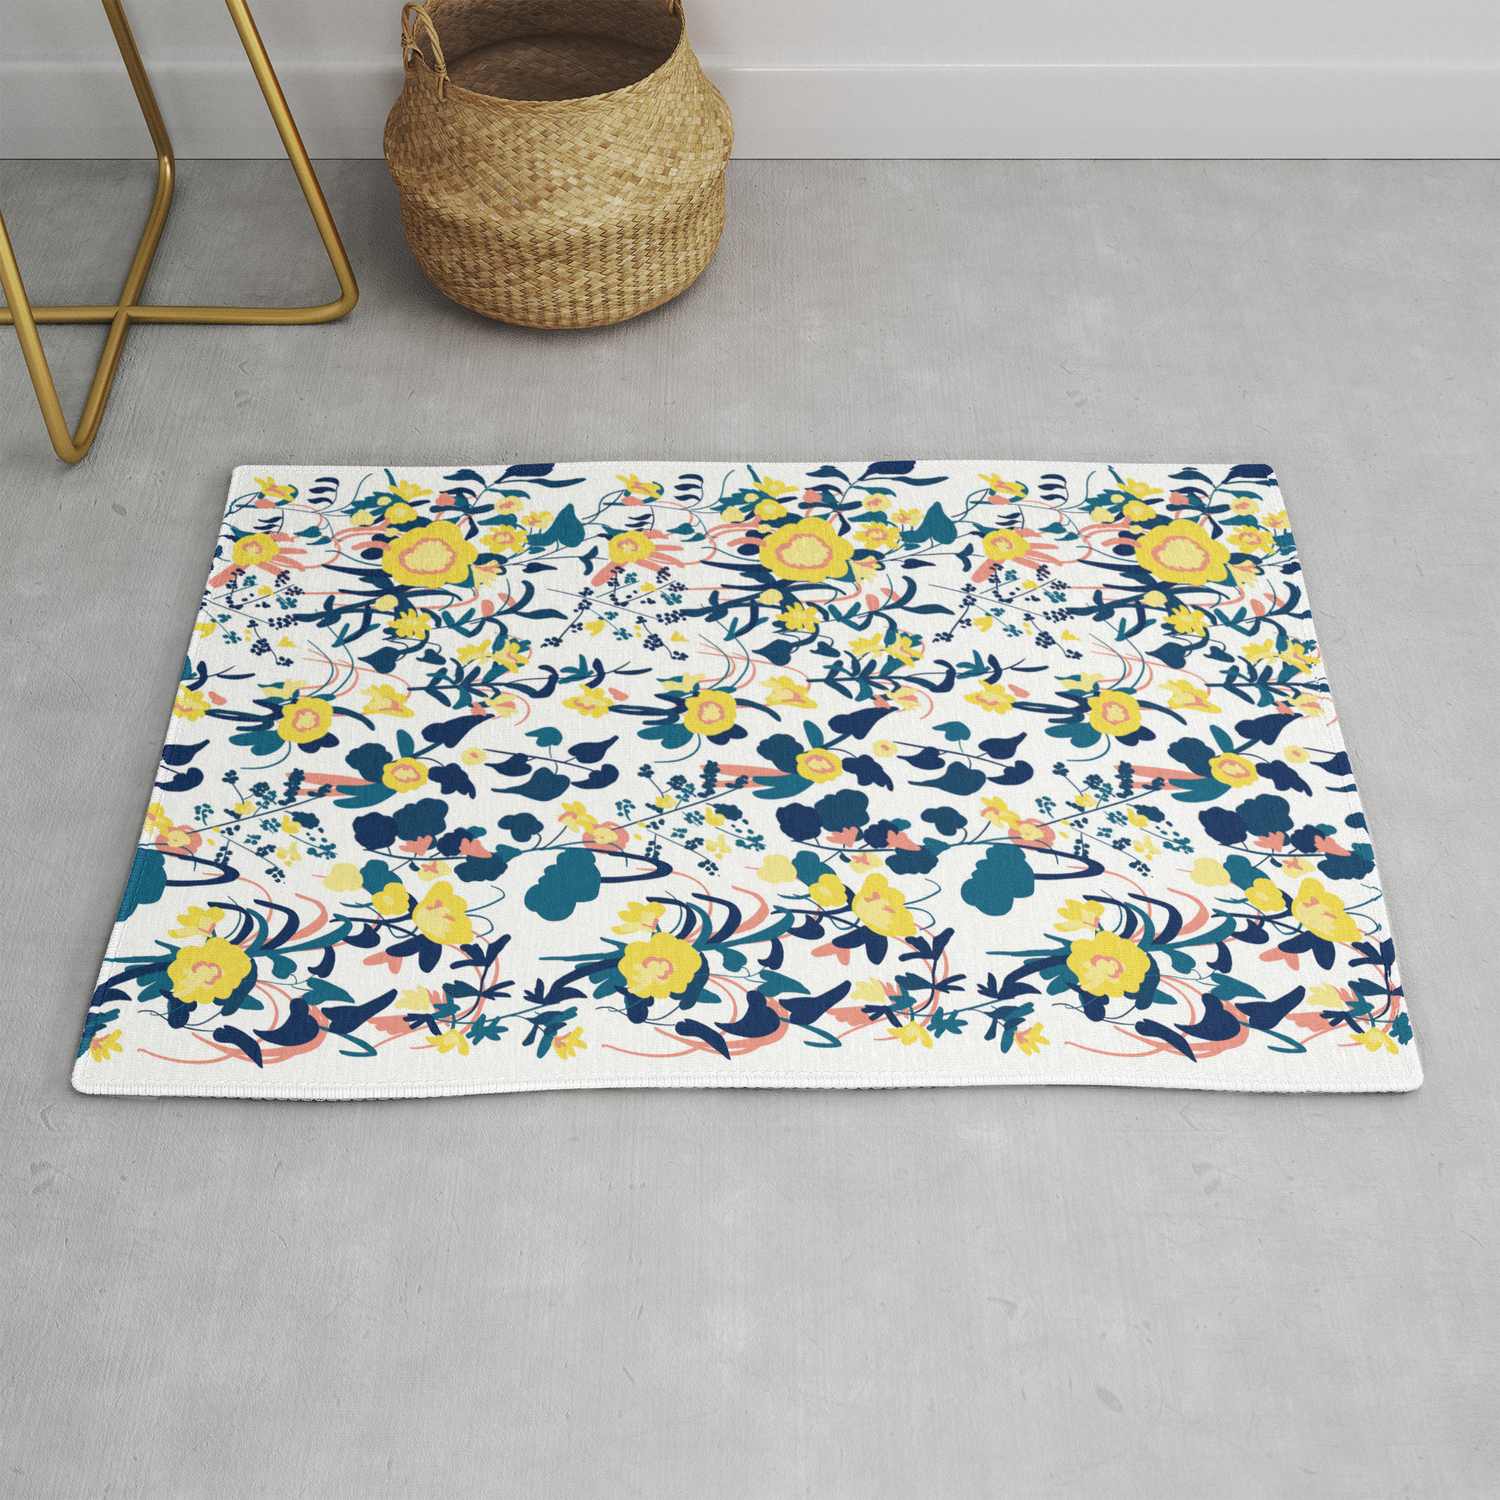 Ercup Yellow Salmon Pink And Navy, Navy Blue Patterned Rug